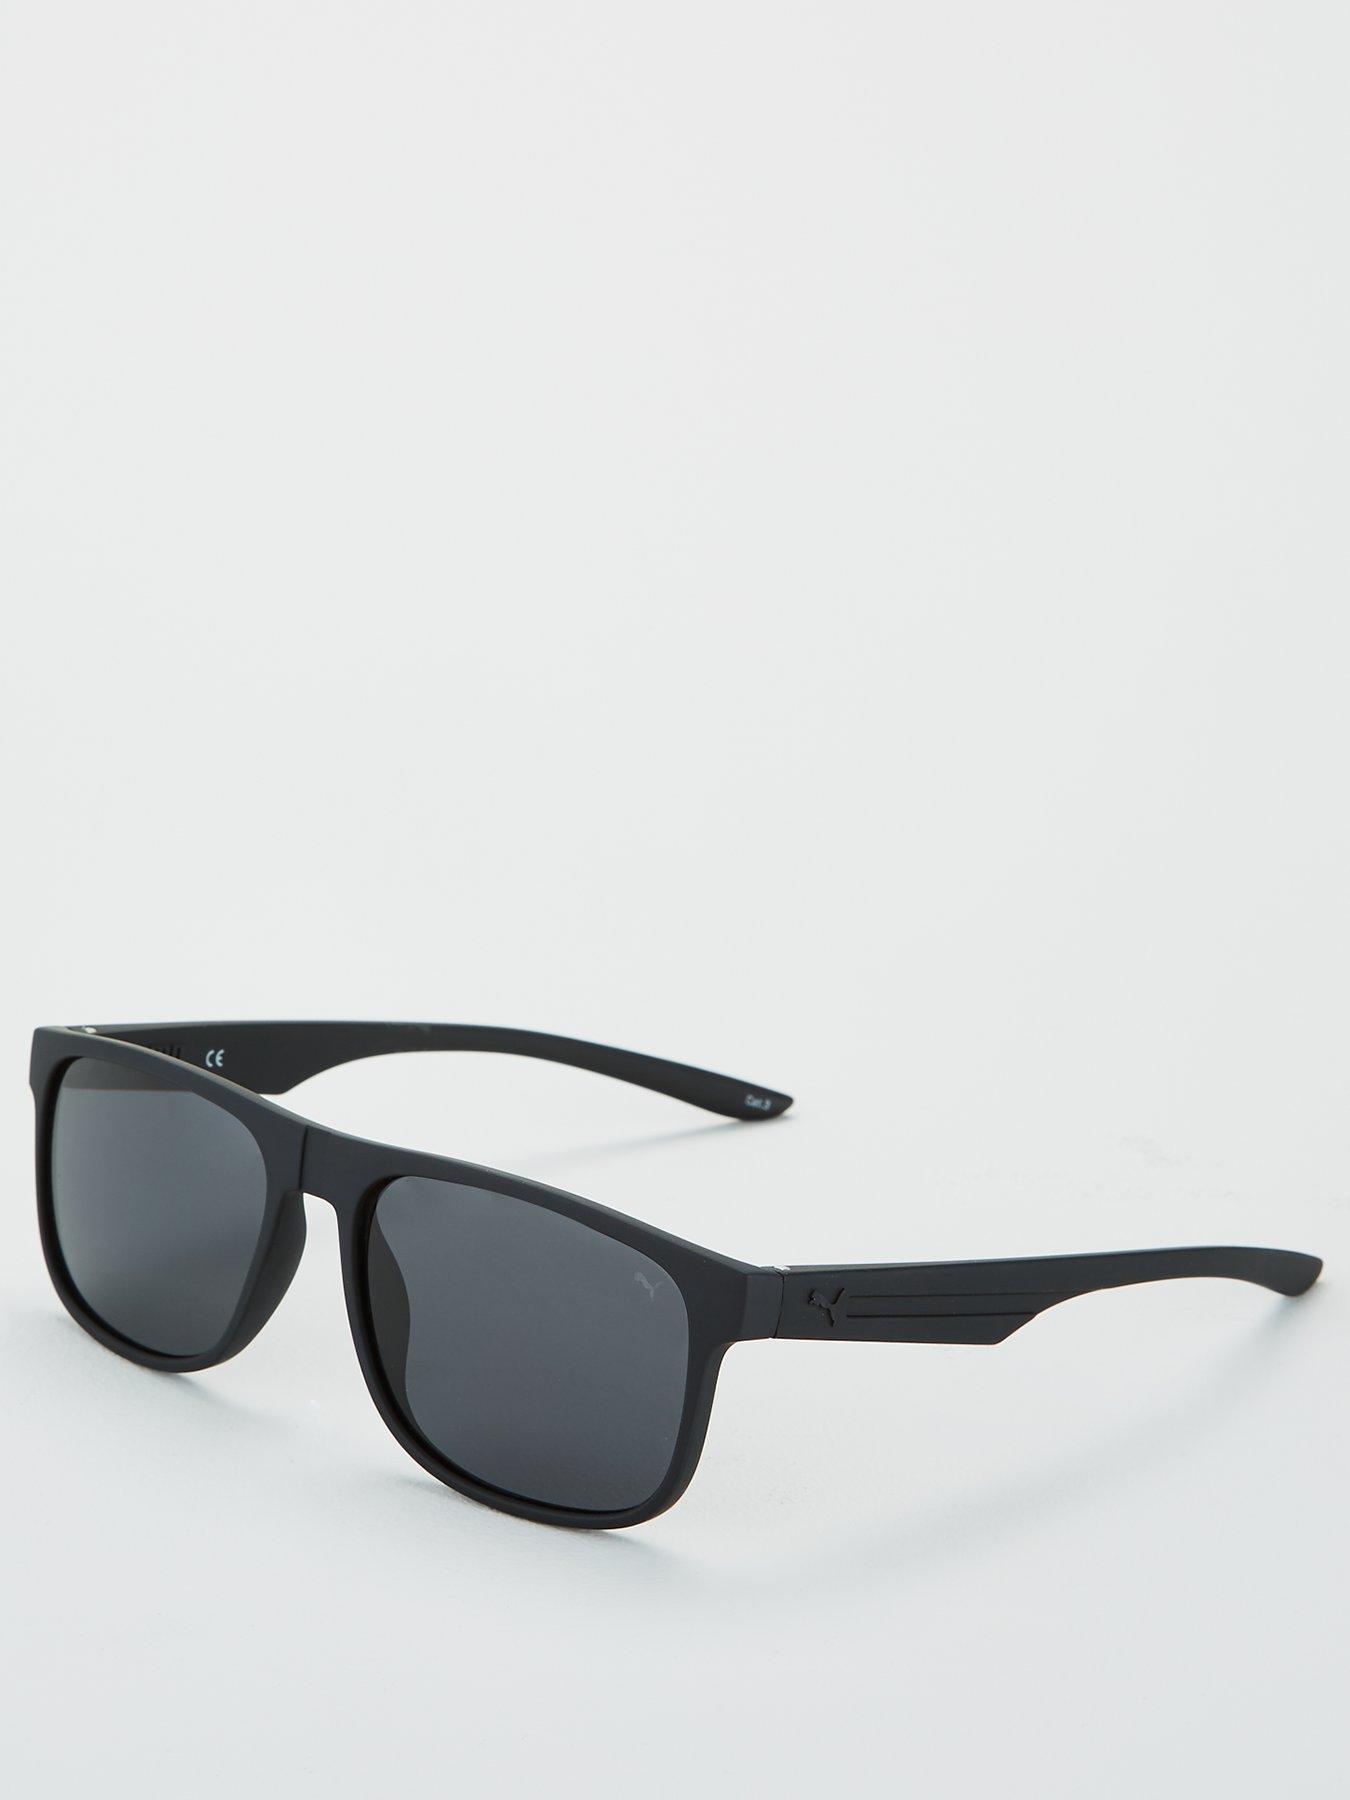 abercrombie and fitch rectangle sunglasses